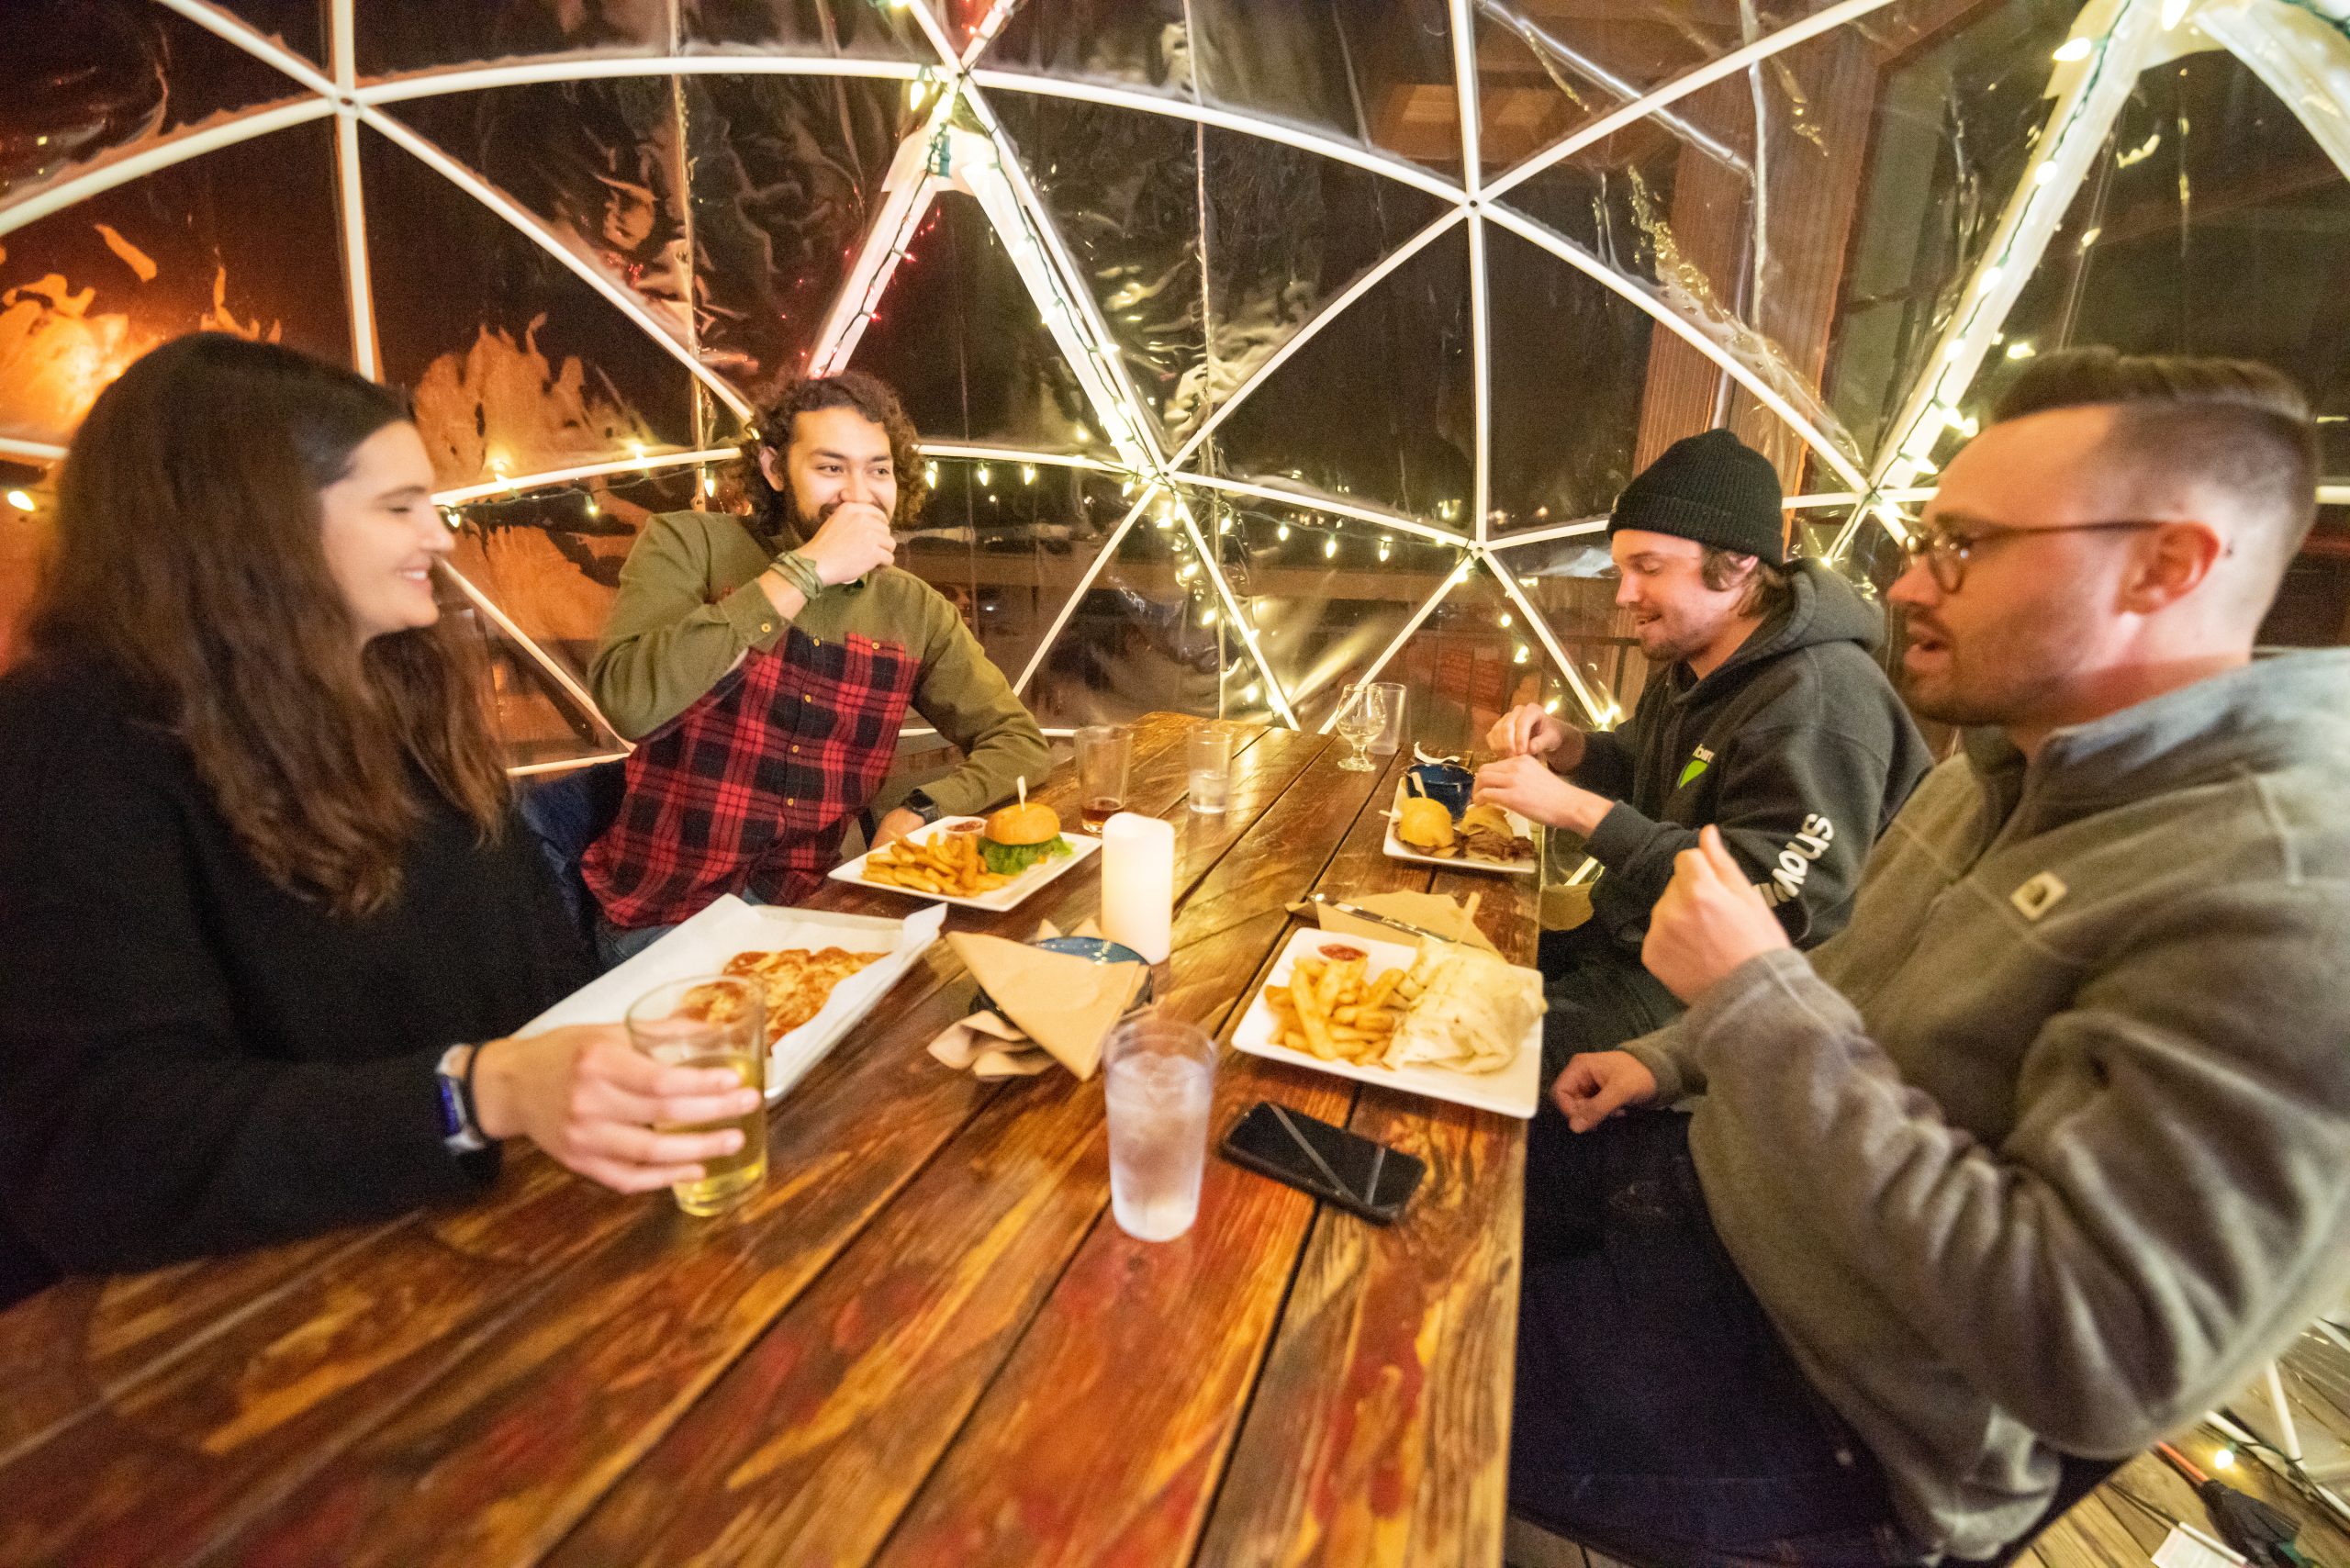 A group of four people seated around a table enjoying a meal at Salmon River Brewery.